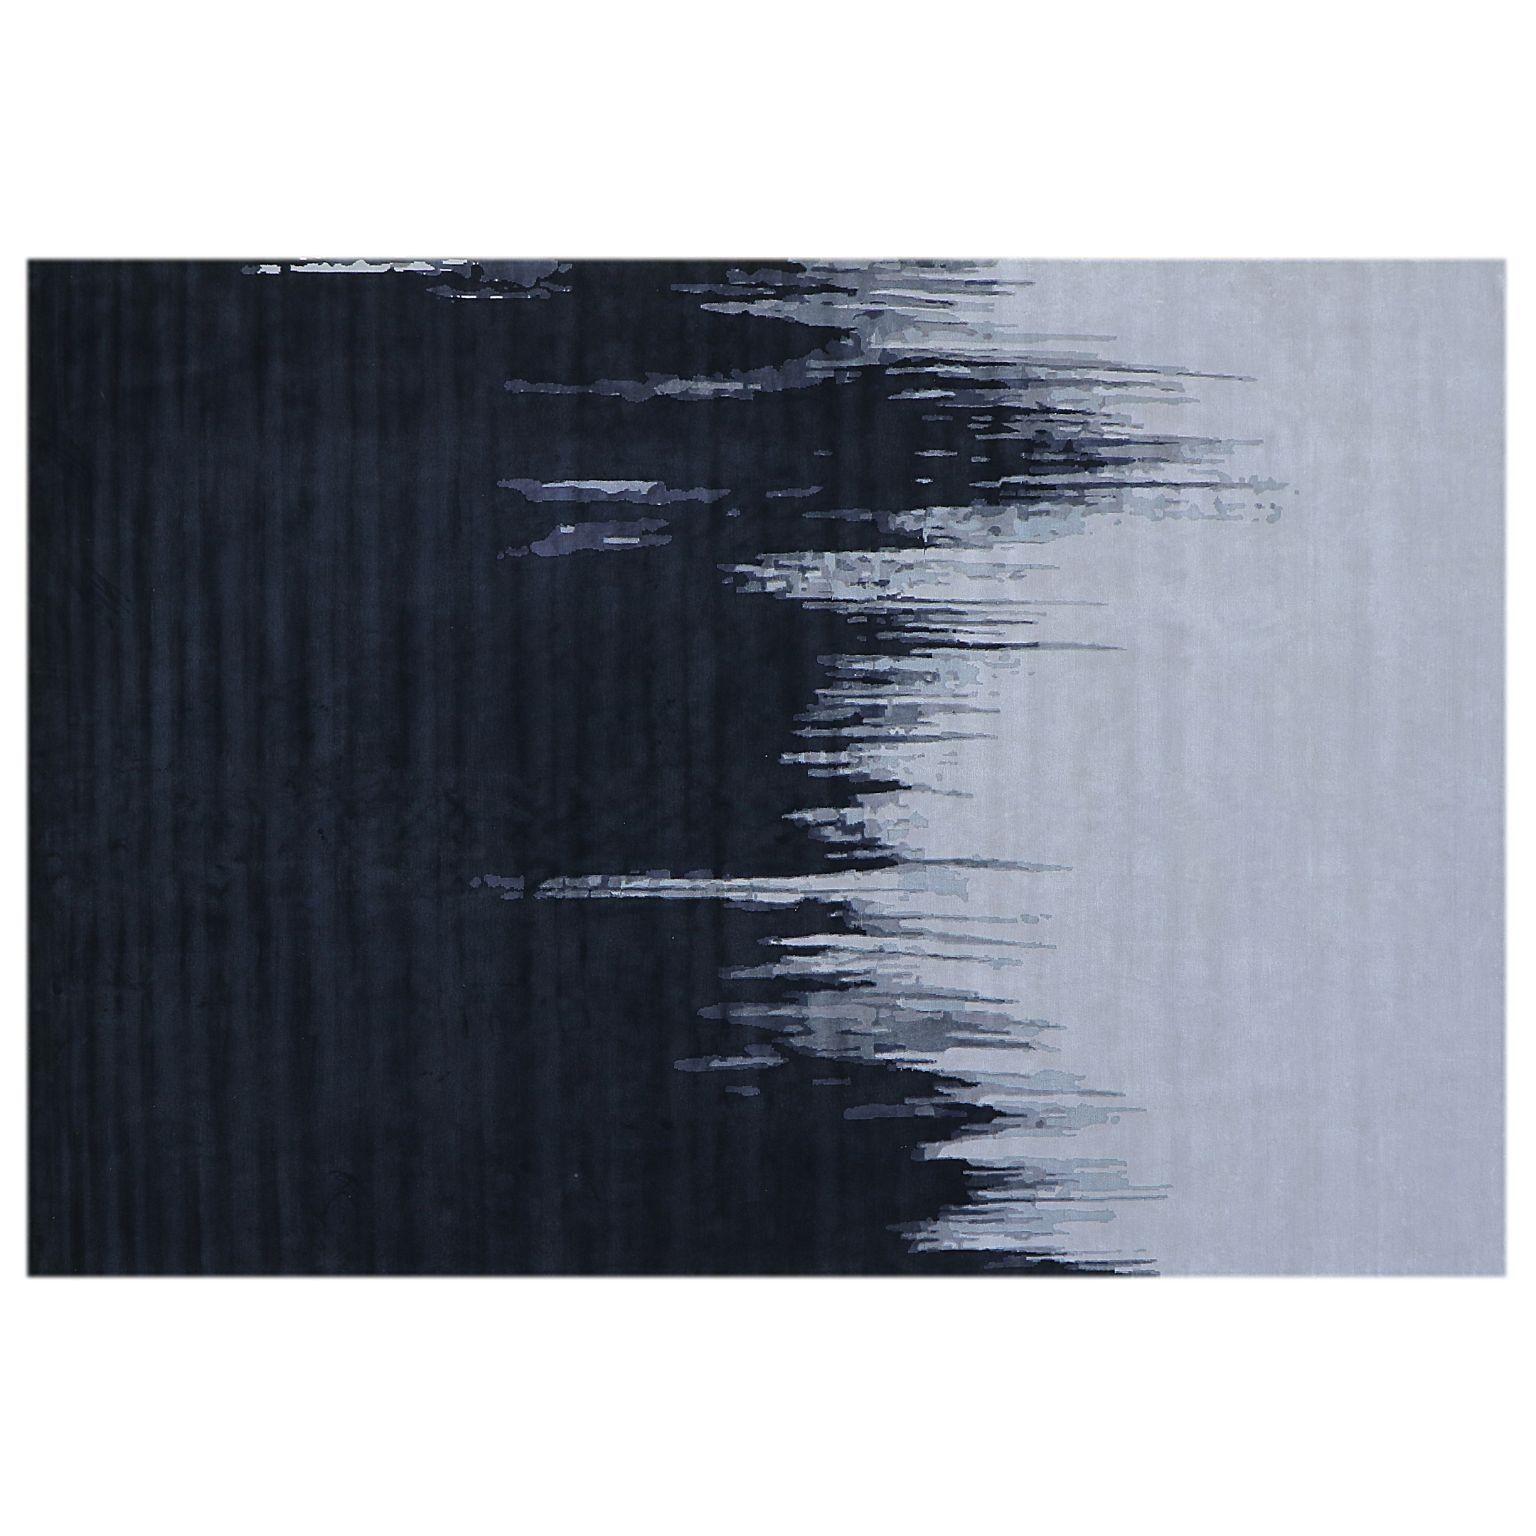 Dip-dye Medium rug by Art & Loom
Dimensions: D274.3 x H365.8 cm
Materials: New Zealand wool & Chinese silk
Quality (Knots per Inch): 100
Also available in different dimensions.

Samantha Gallacher has always had a keen eye for aesthetics,